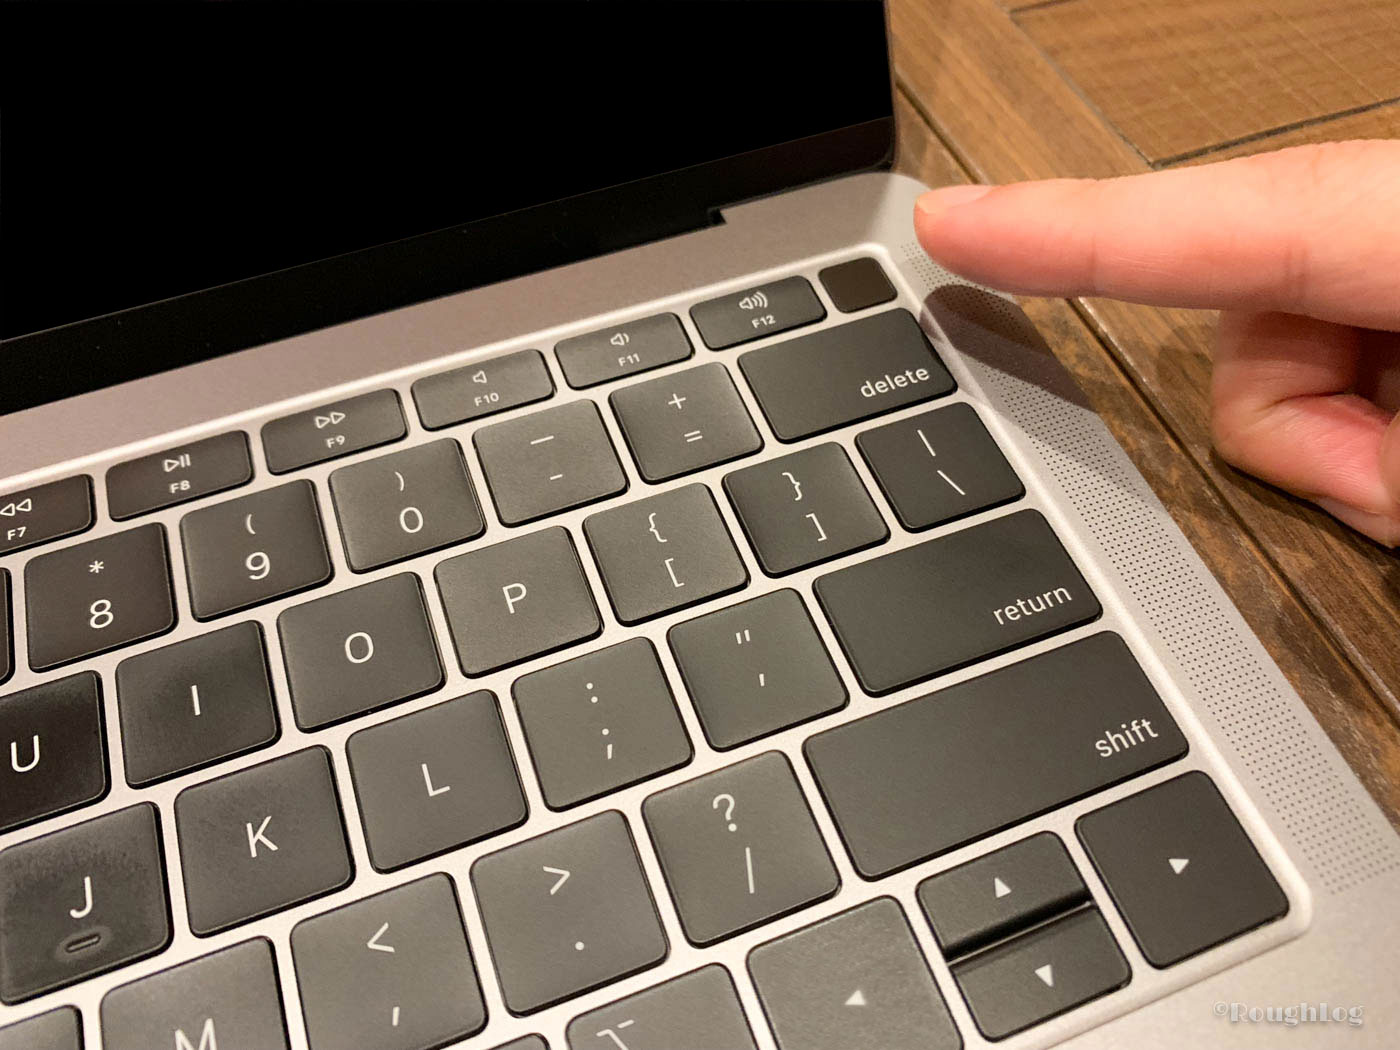 MacBook Air 2018はTouch Bar非搭載で、Touch IDのみ搭載